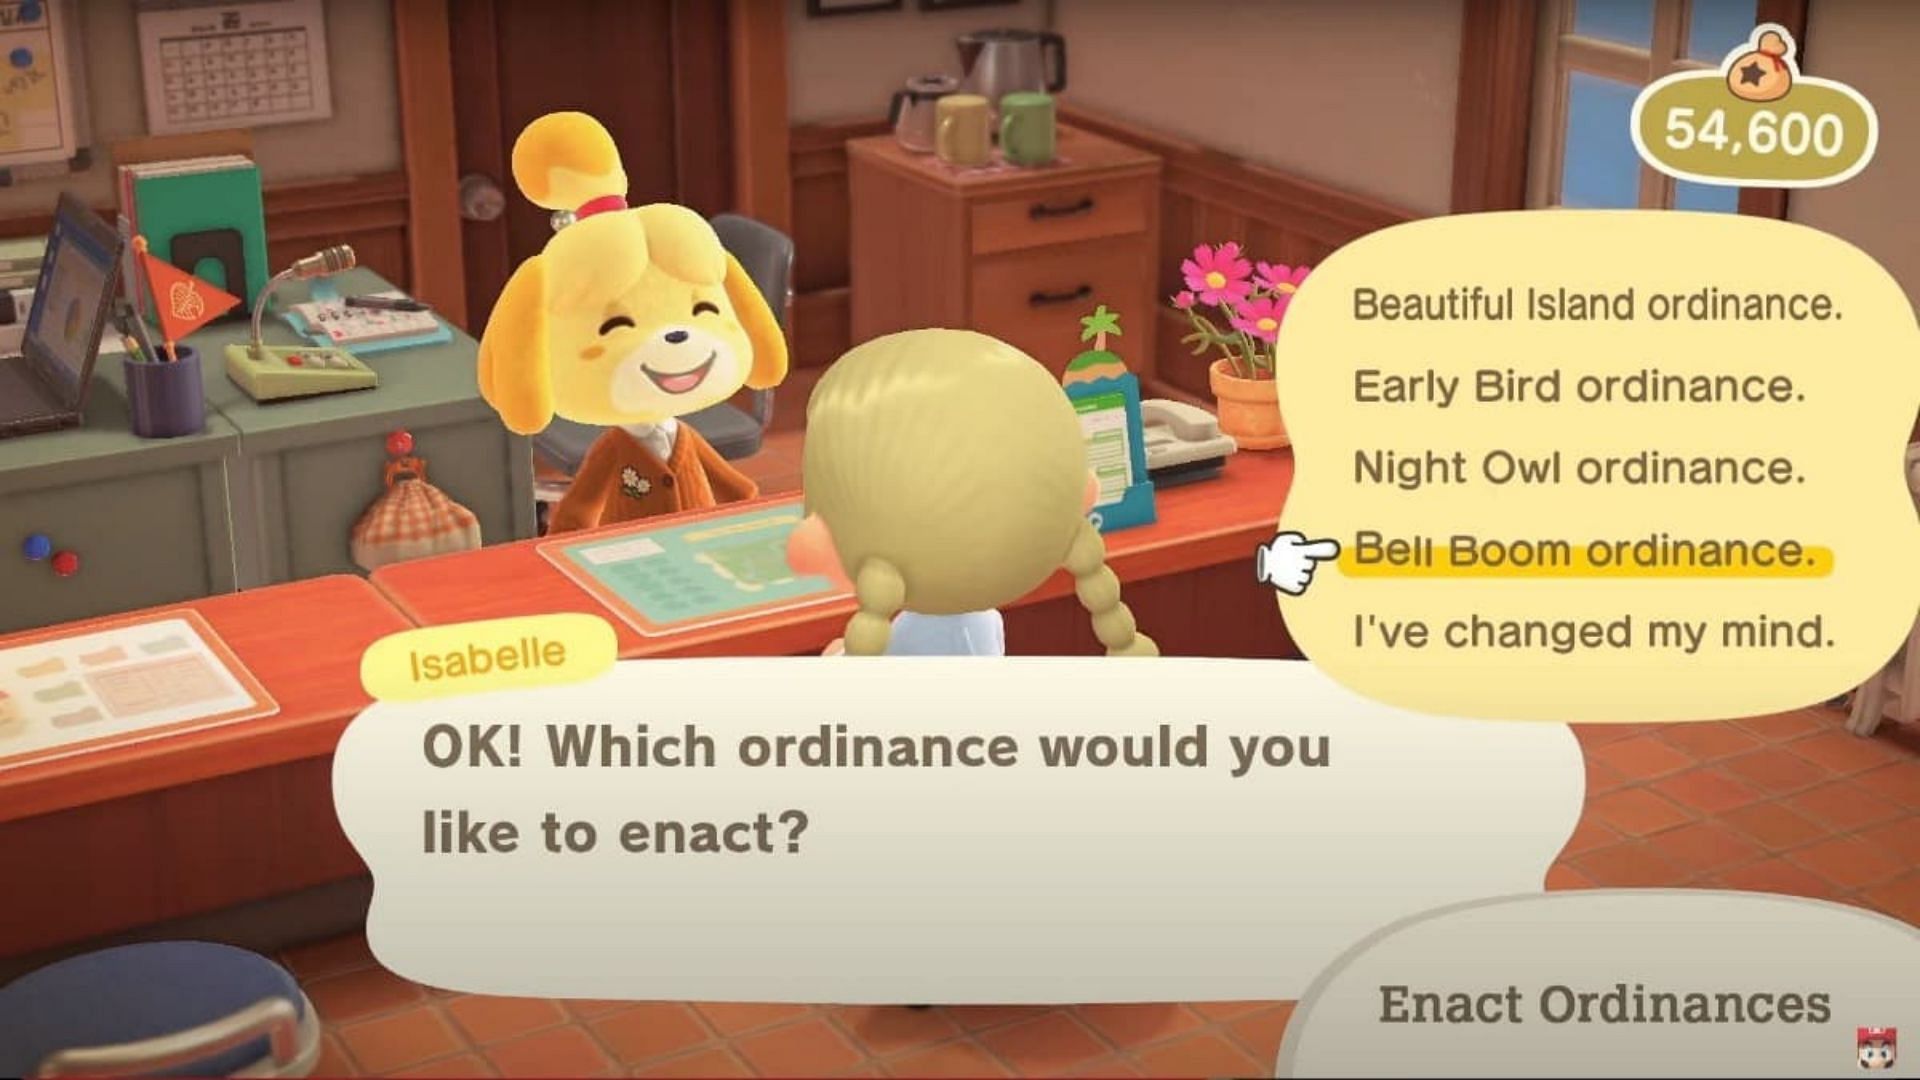 Ordinances were introduced in Animal Crossing: New Horizons with the 2.0 update (Image via Digital Trends)